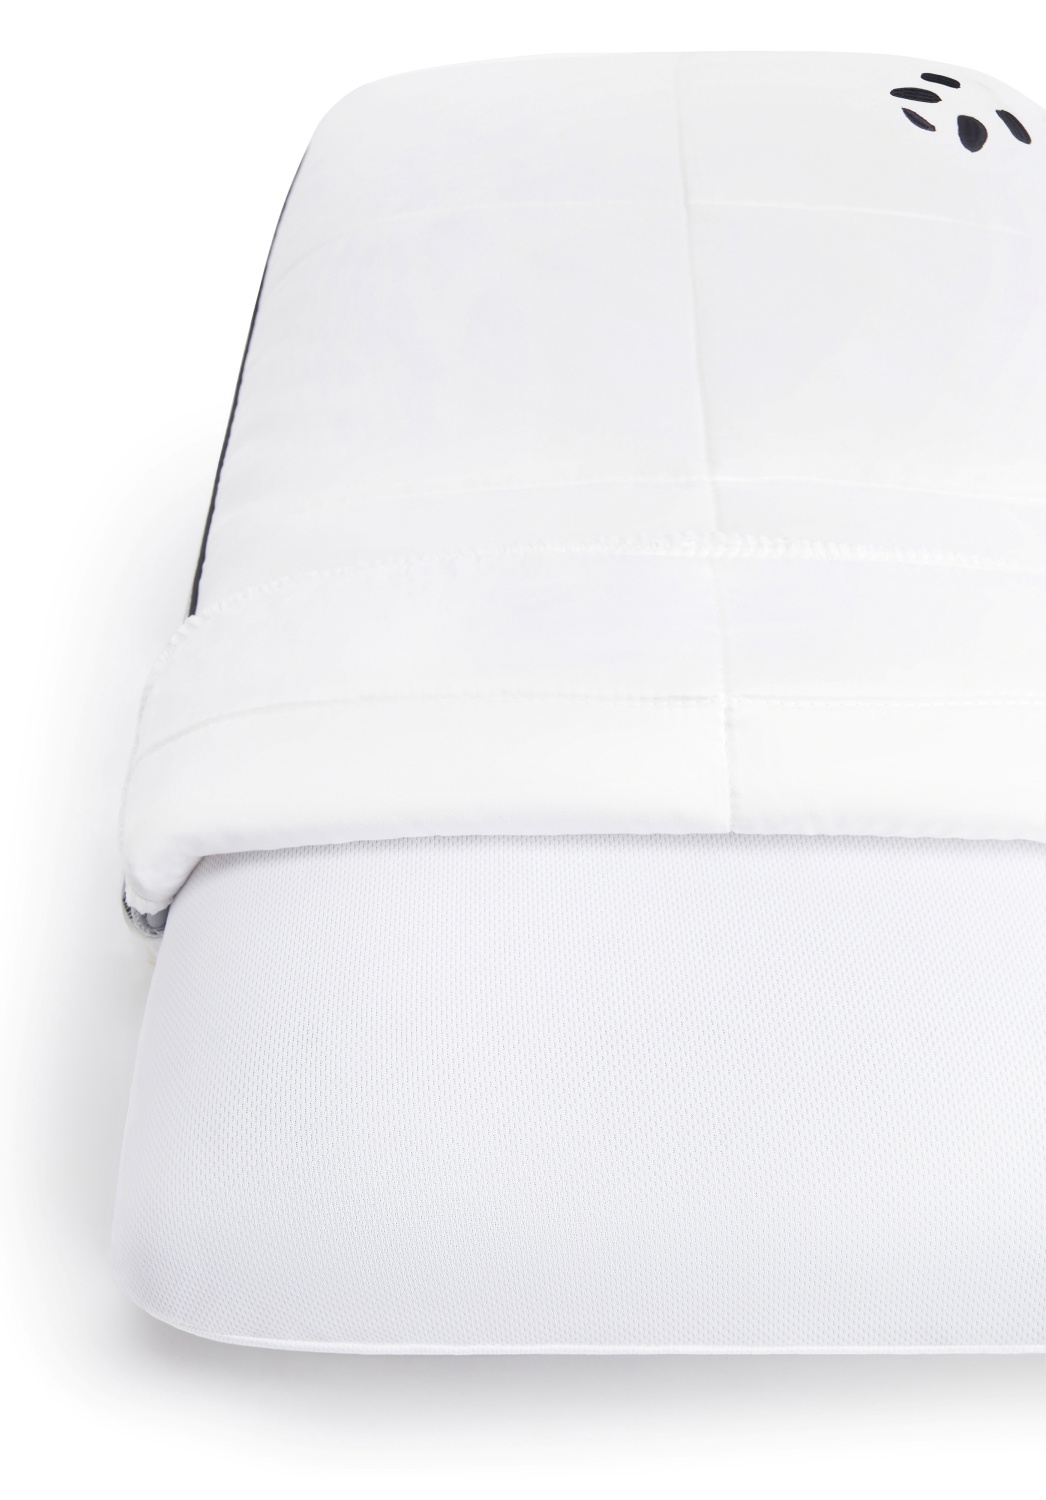 Hybrid Bamboo Pillow Cover Half Off